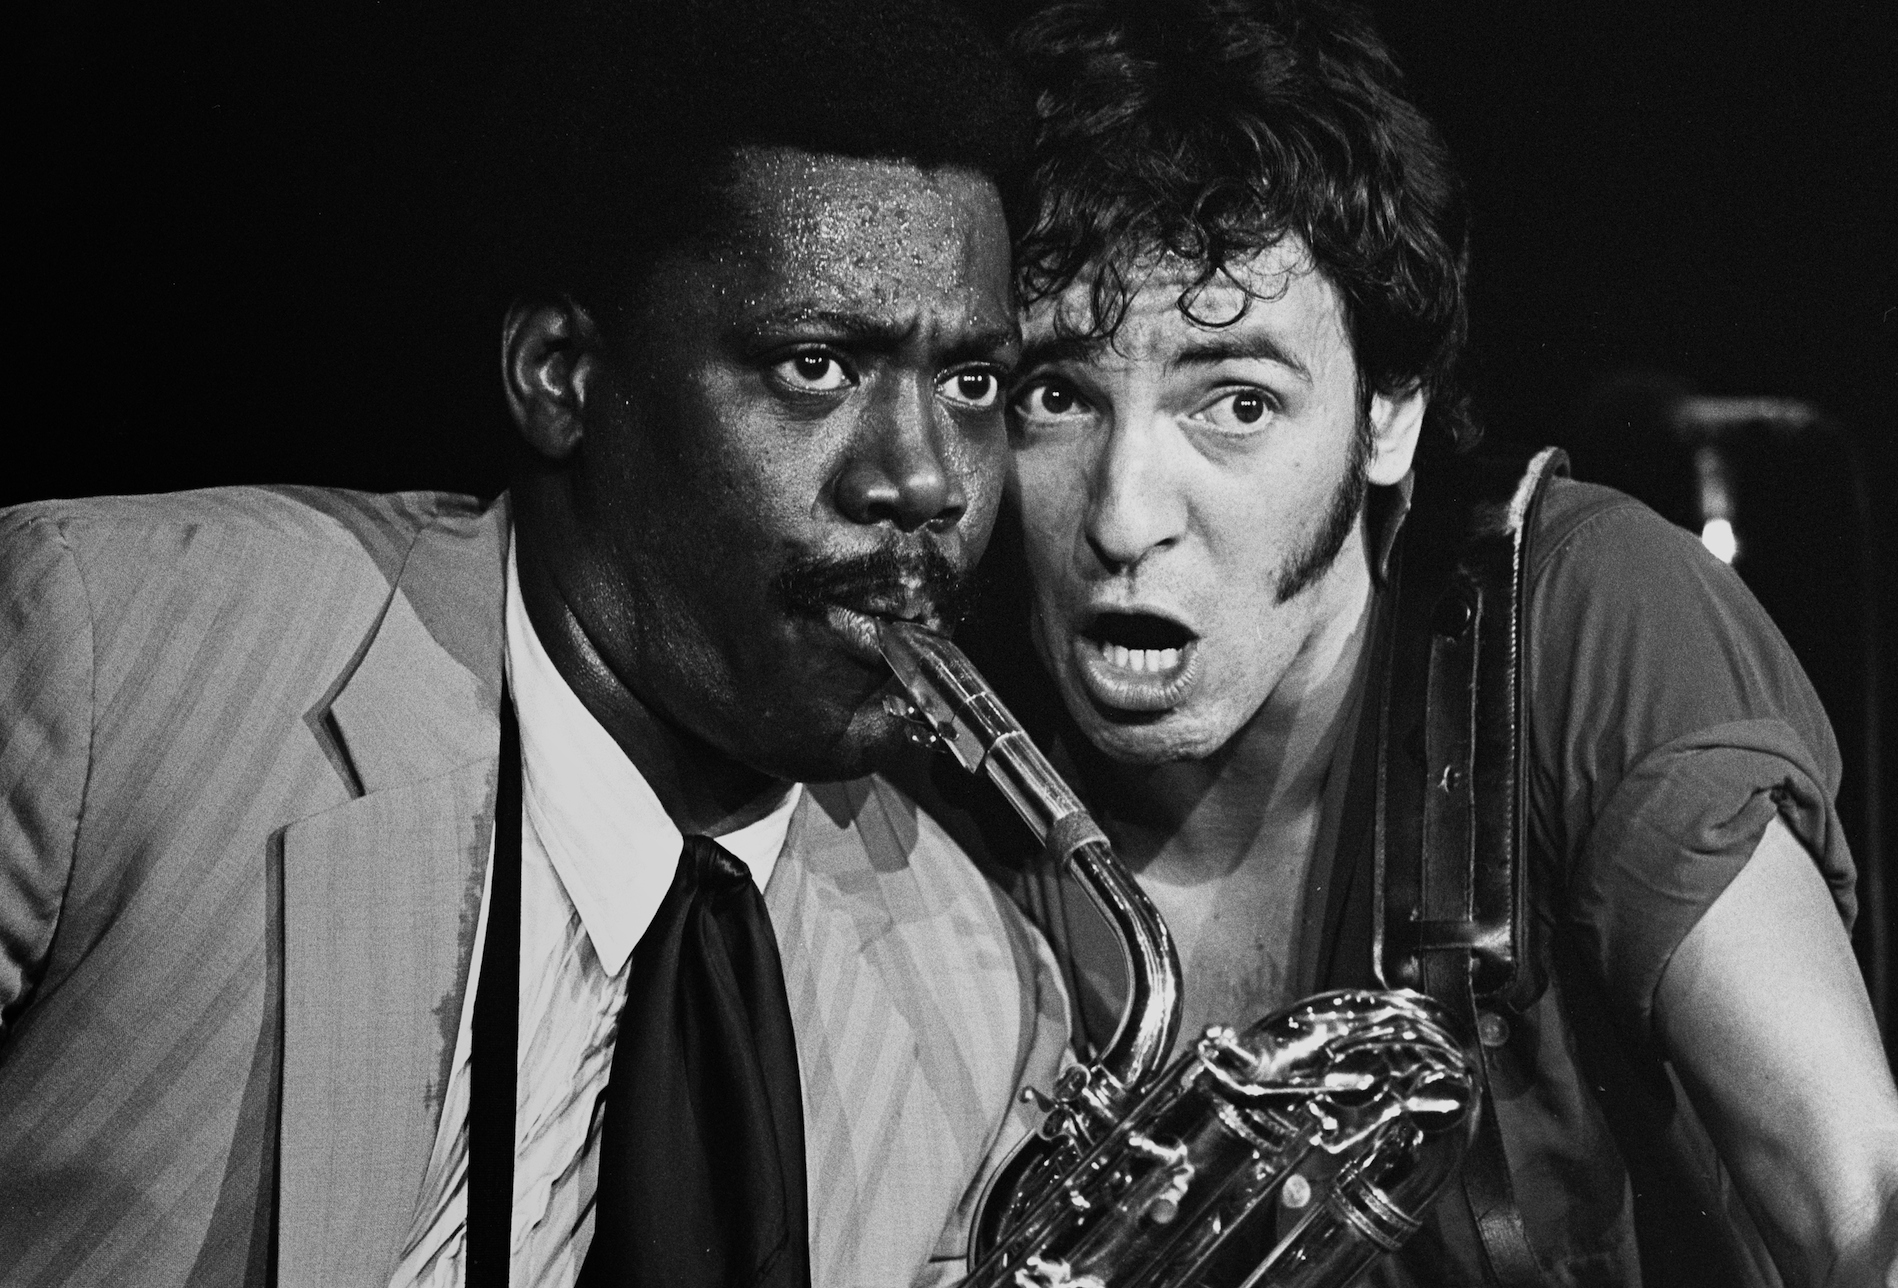 Legendary rock star and icon Bruce Springsteen performs with Clarence Clemons